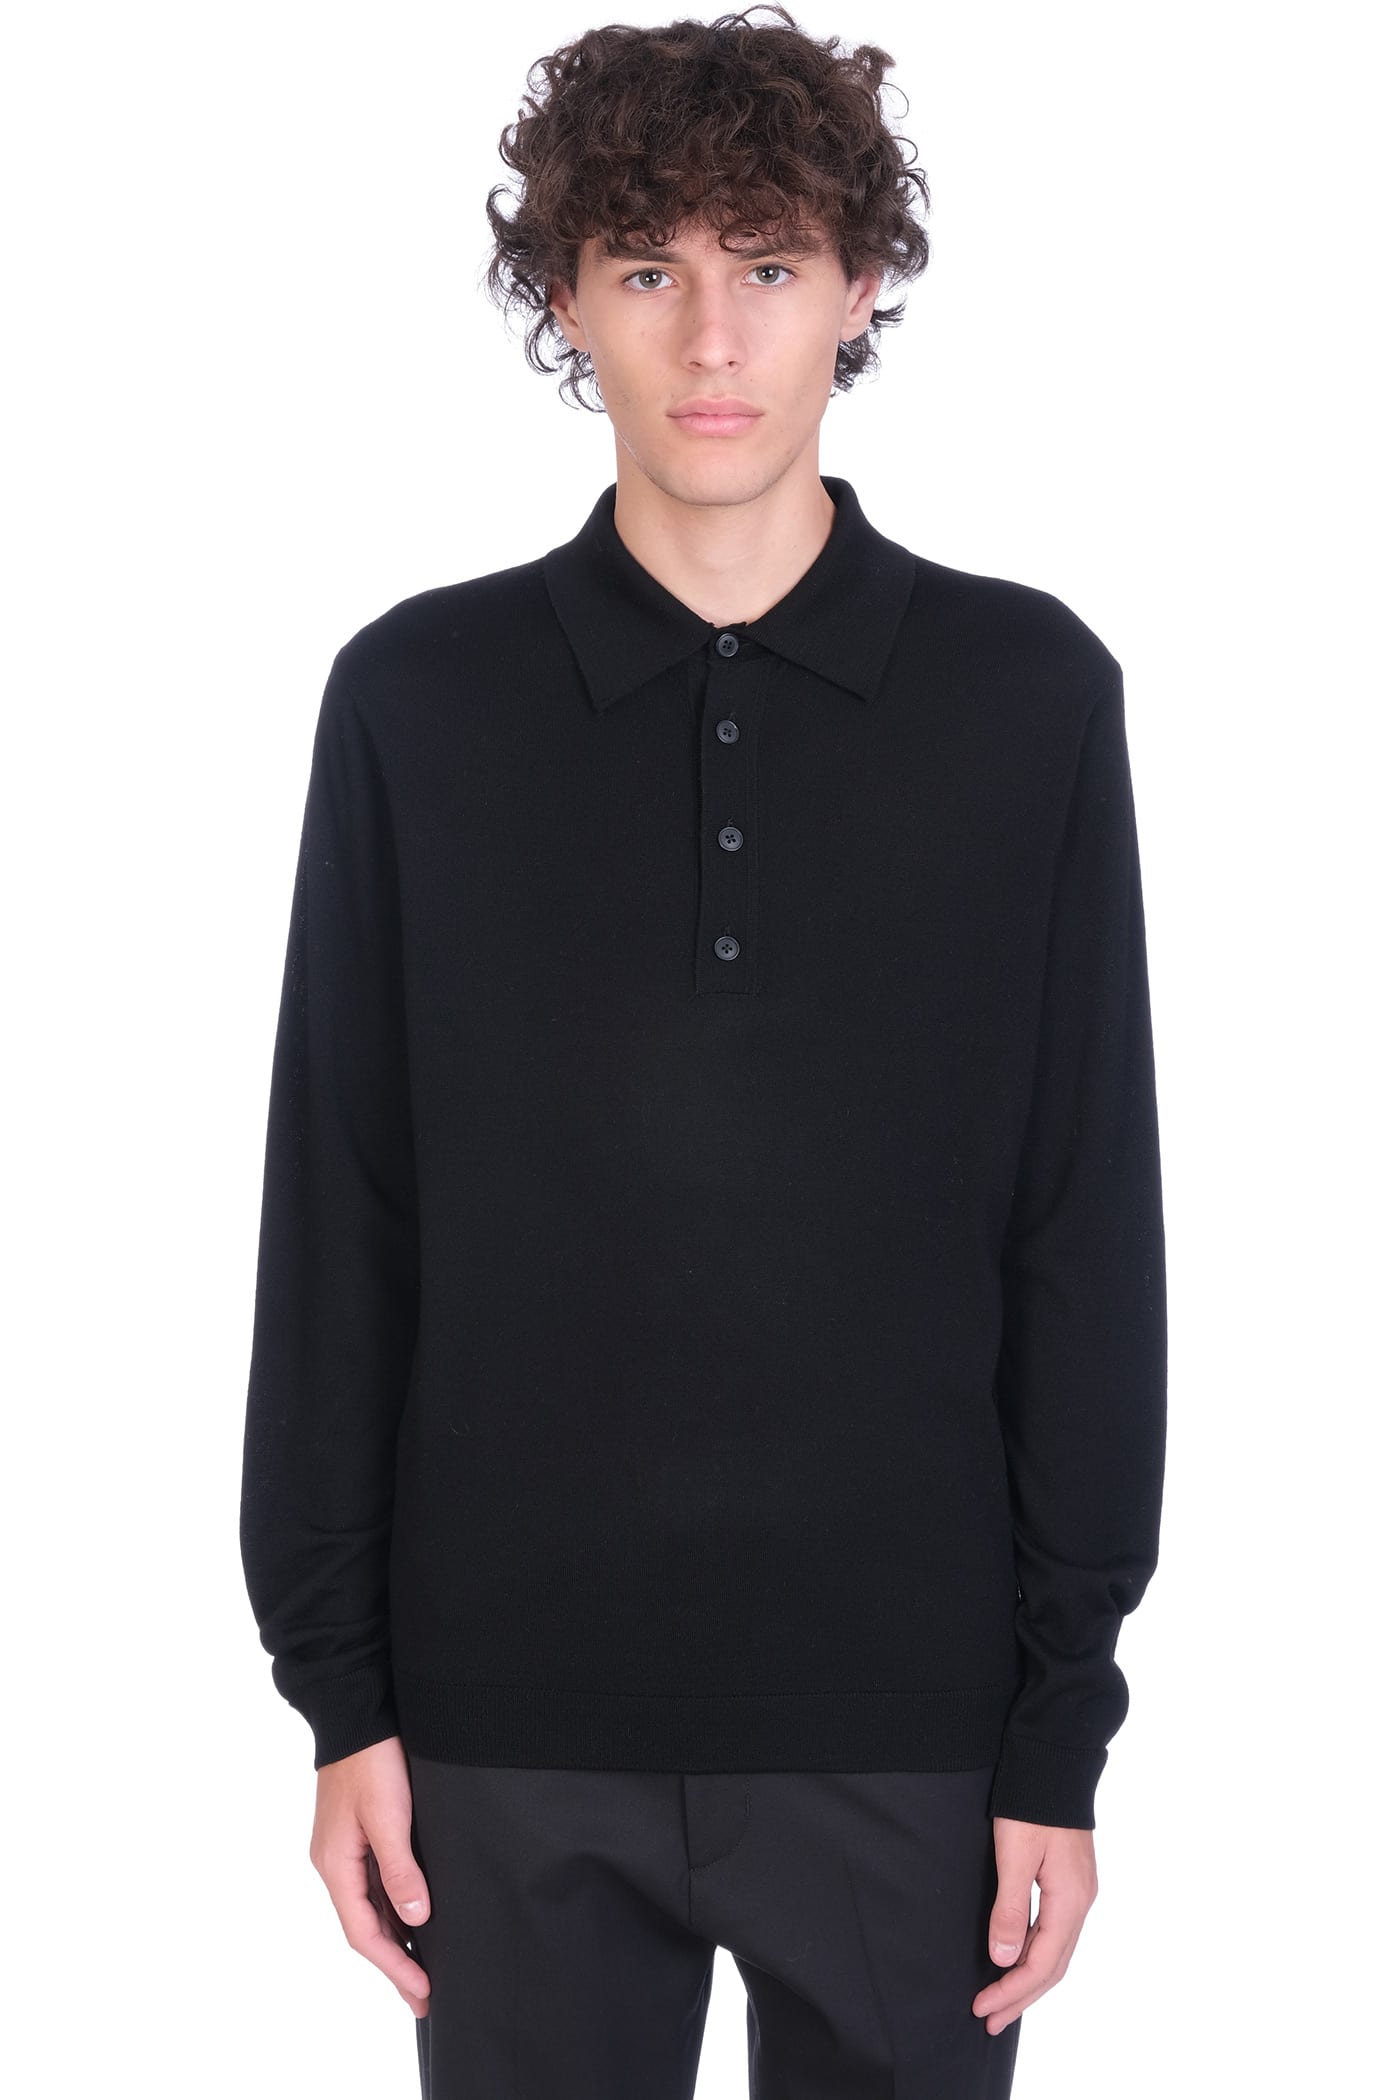 Low Brand Polo In Black Wool